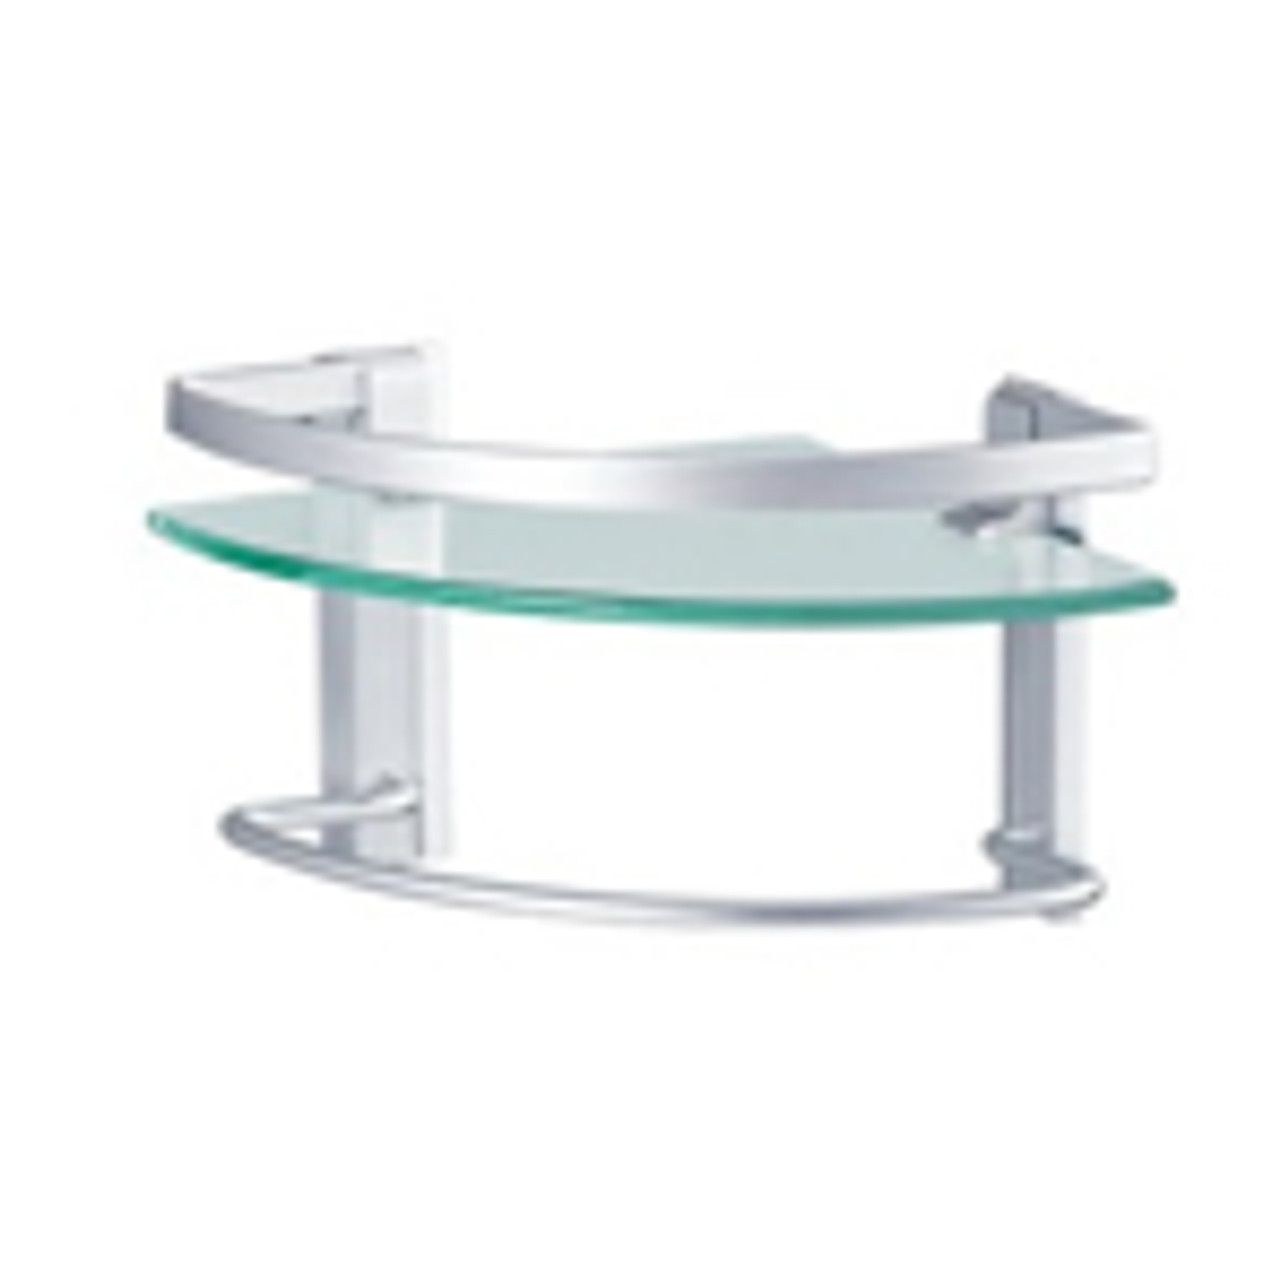 Stainless Steel Corner Shelf for Bathroom and Kitchen